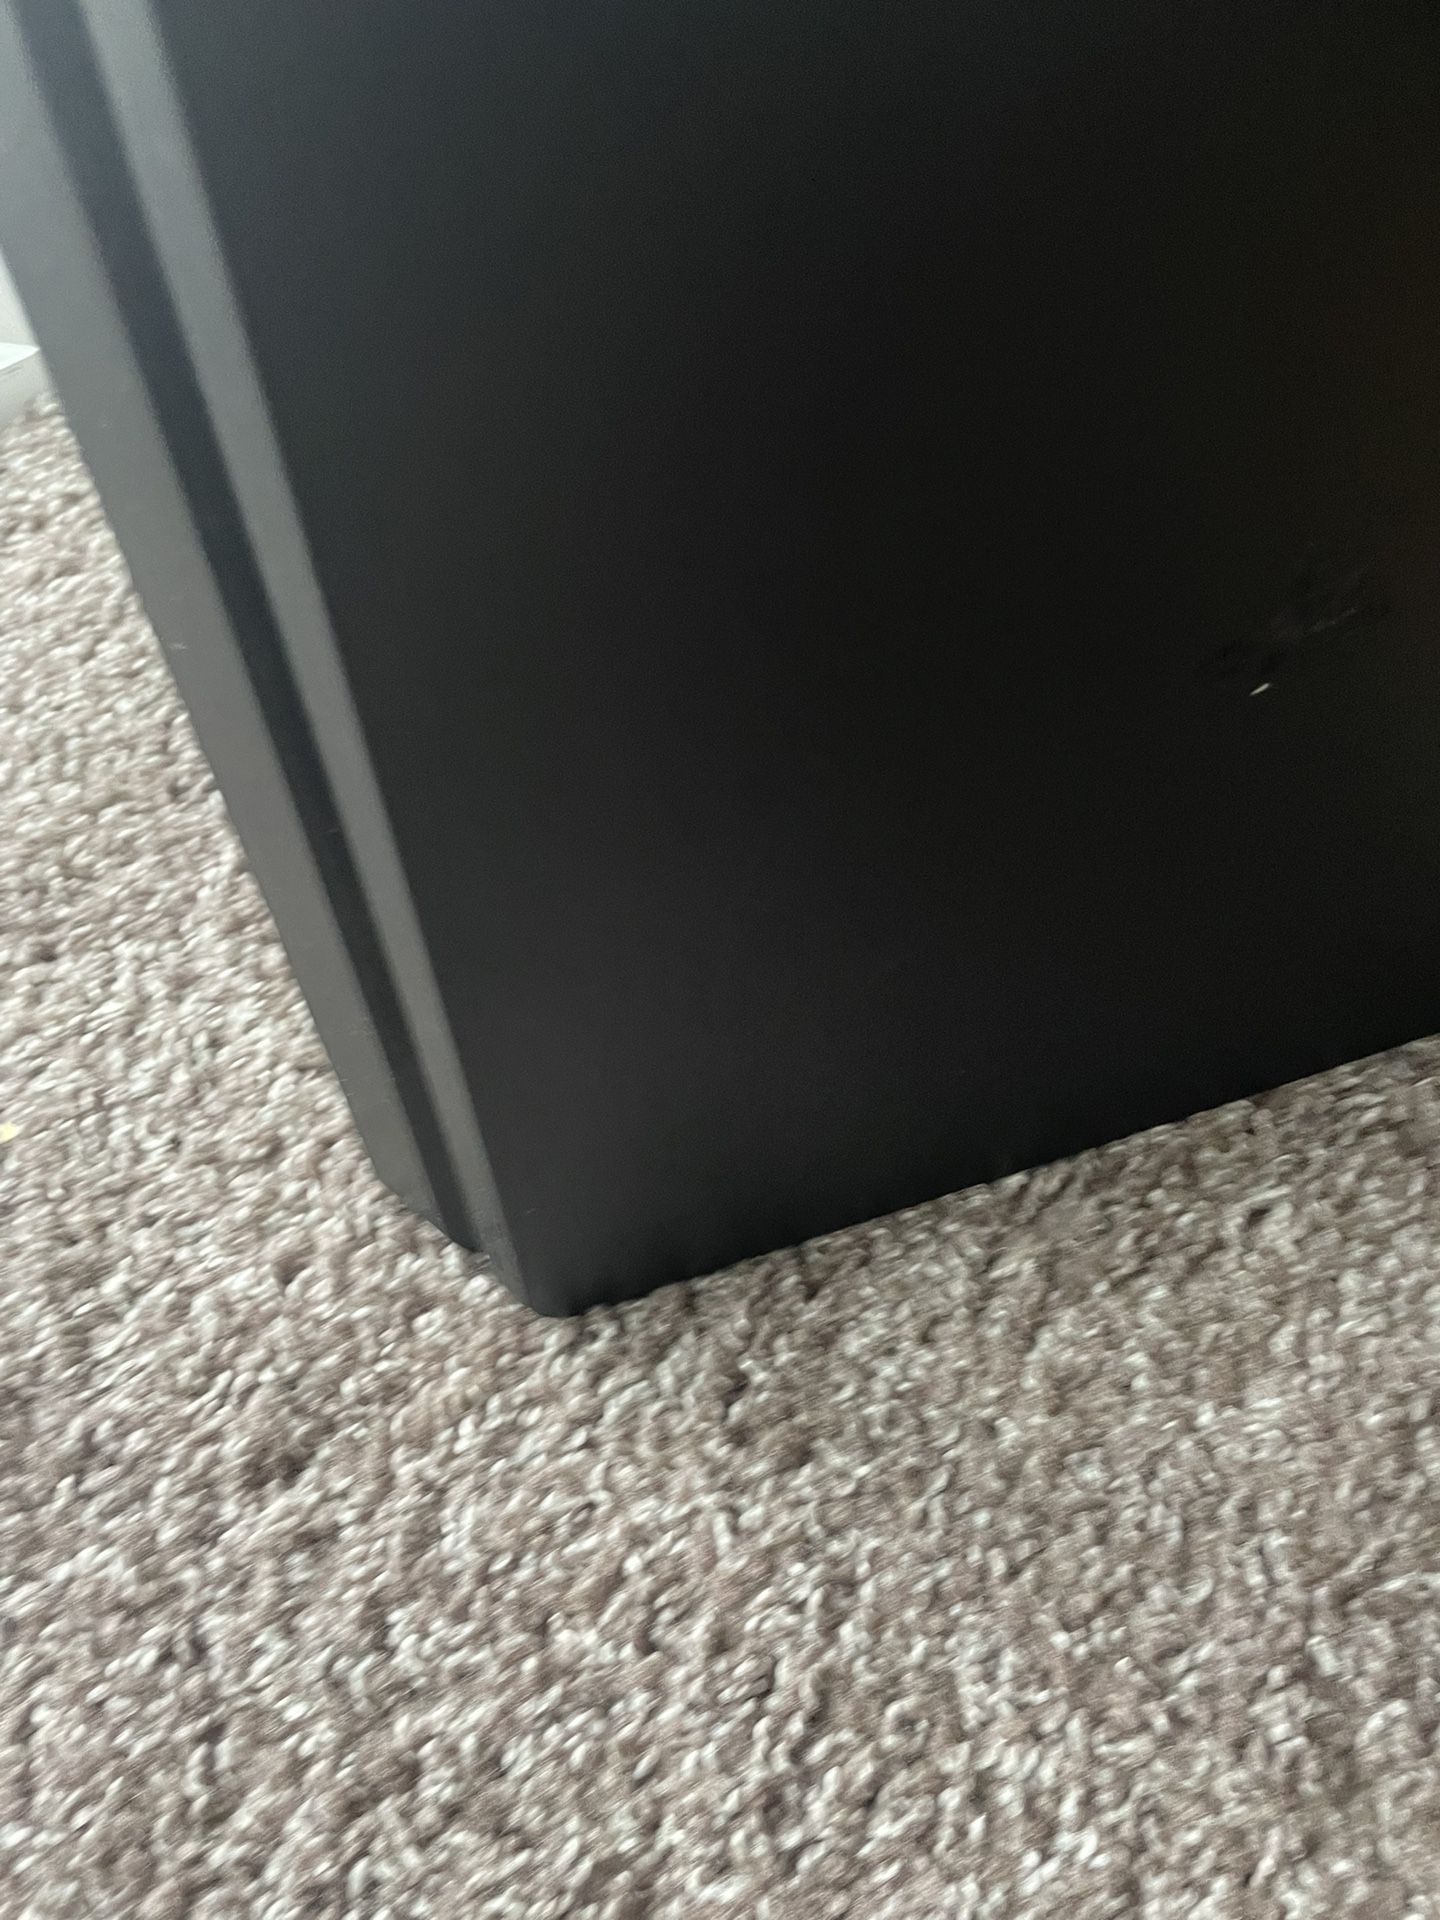 PS4 Slim 500gb With Games